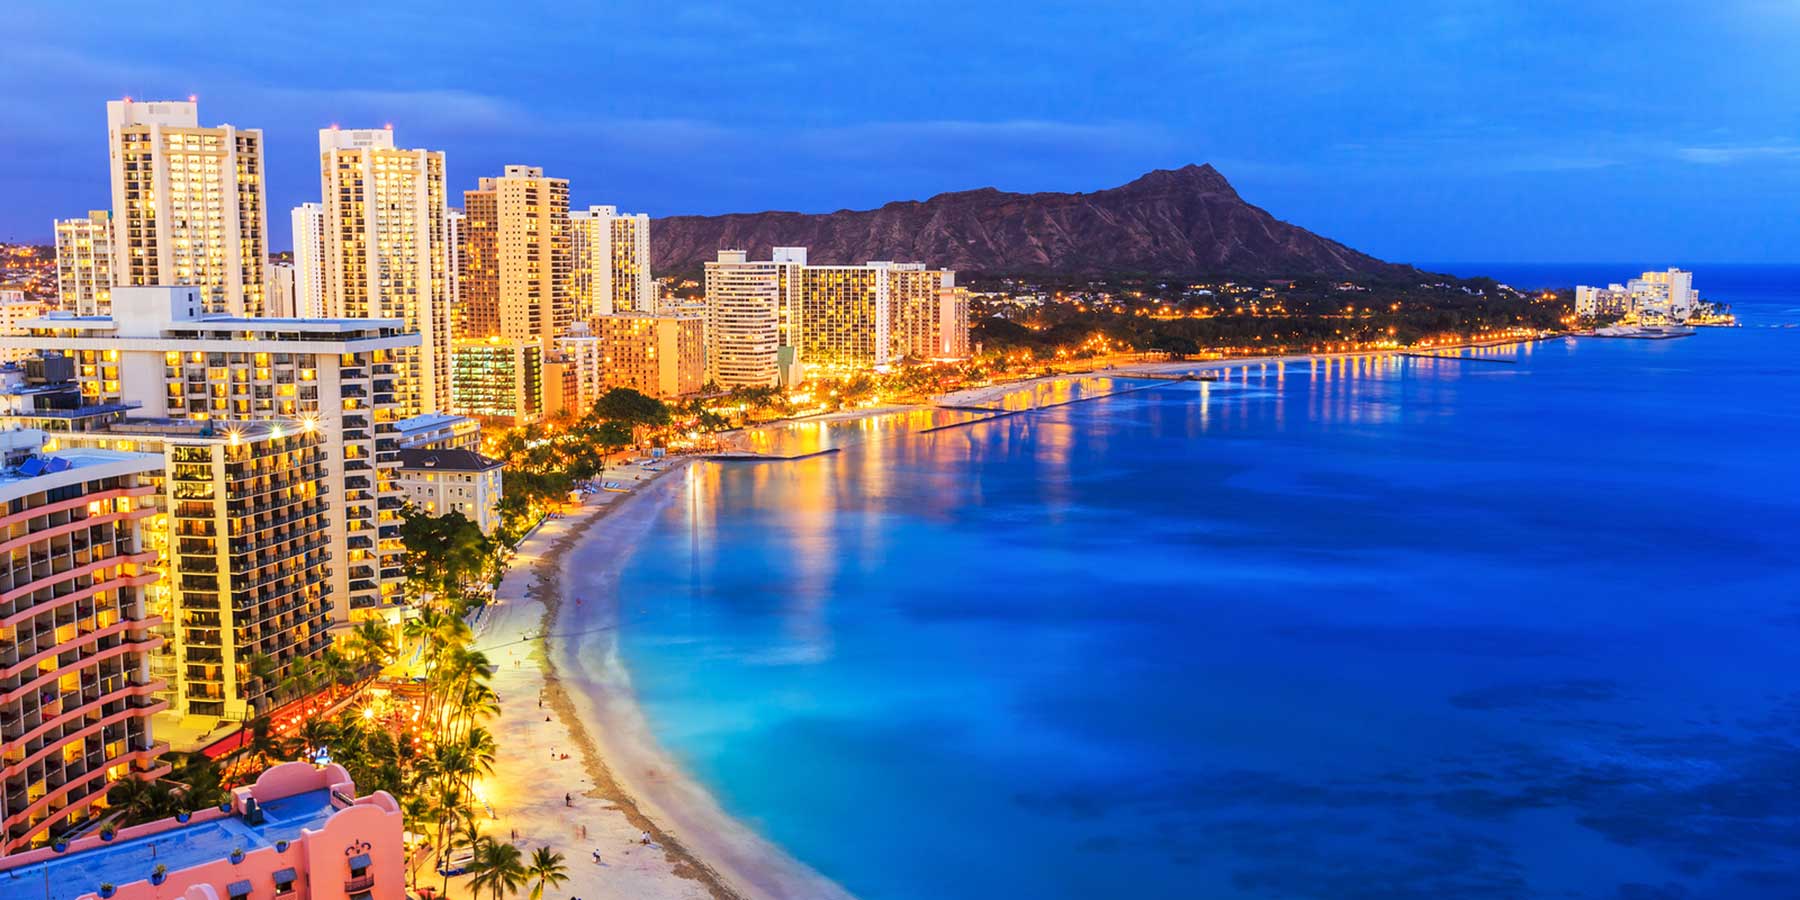 The Traveler's Guide to an Iconic Hawaiian Vacation in Honolulu